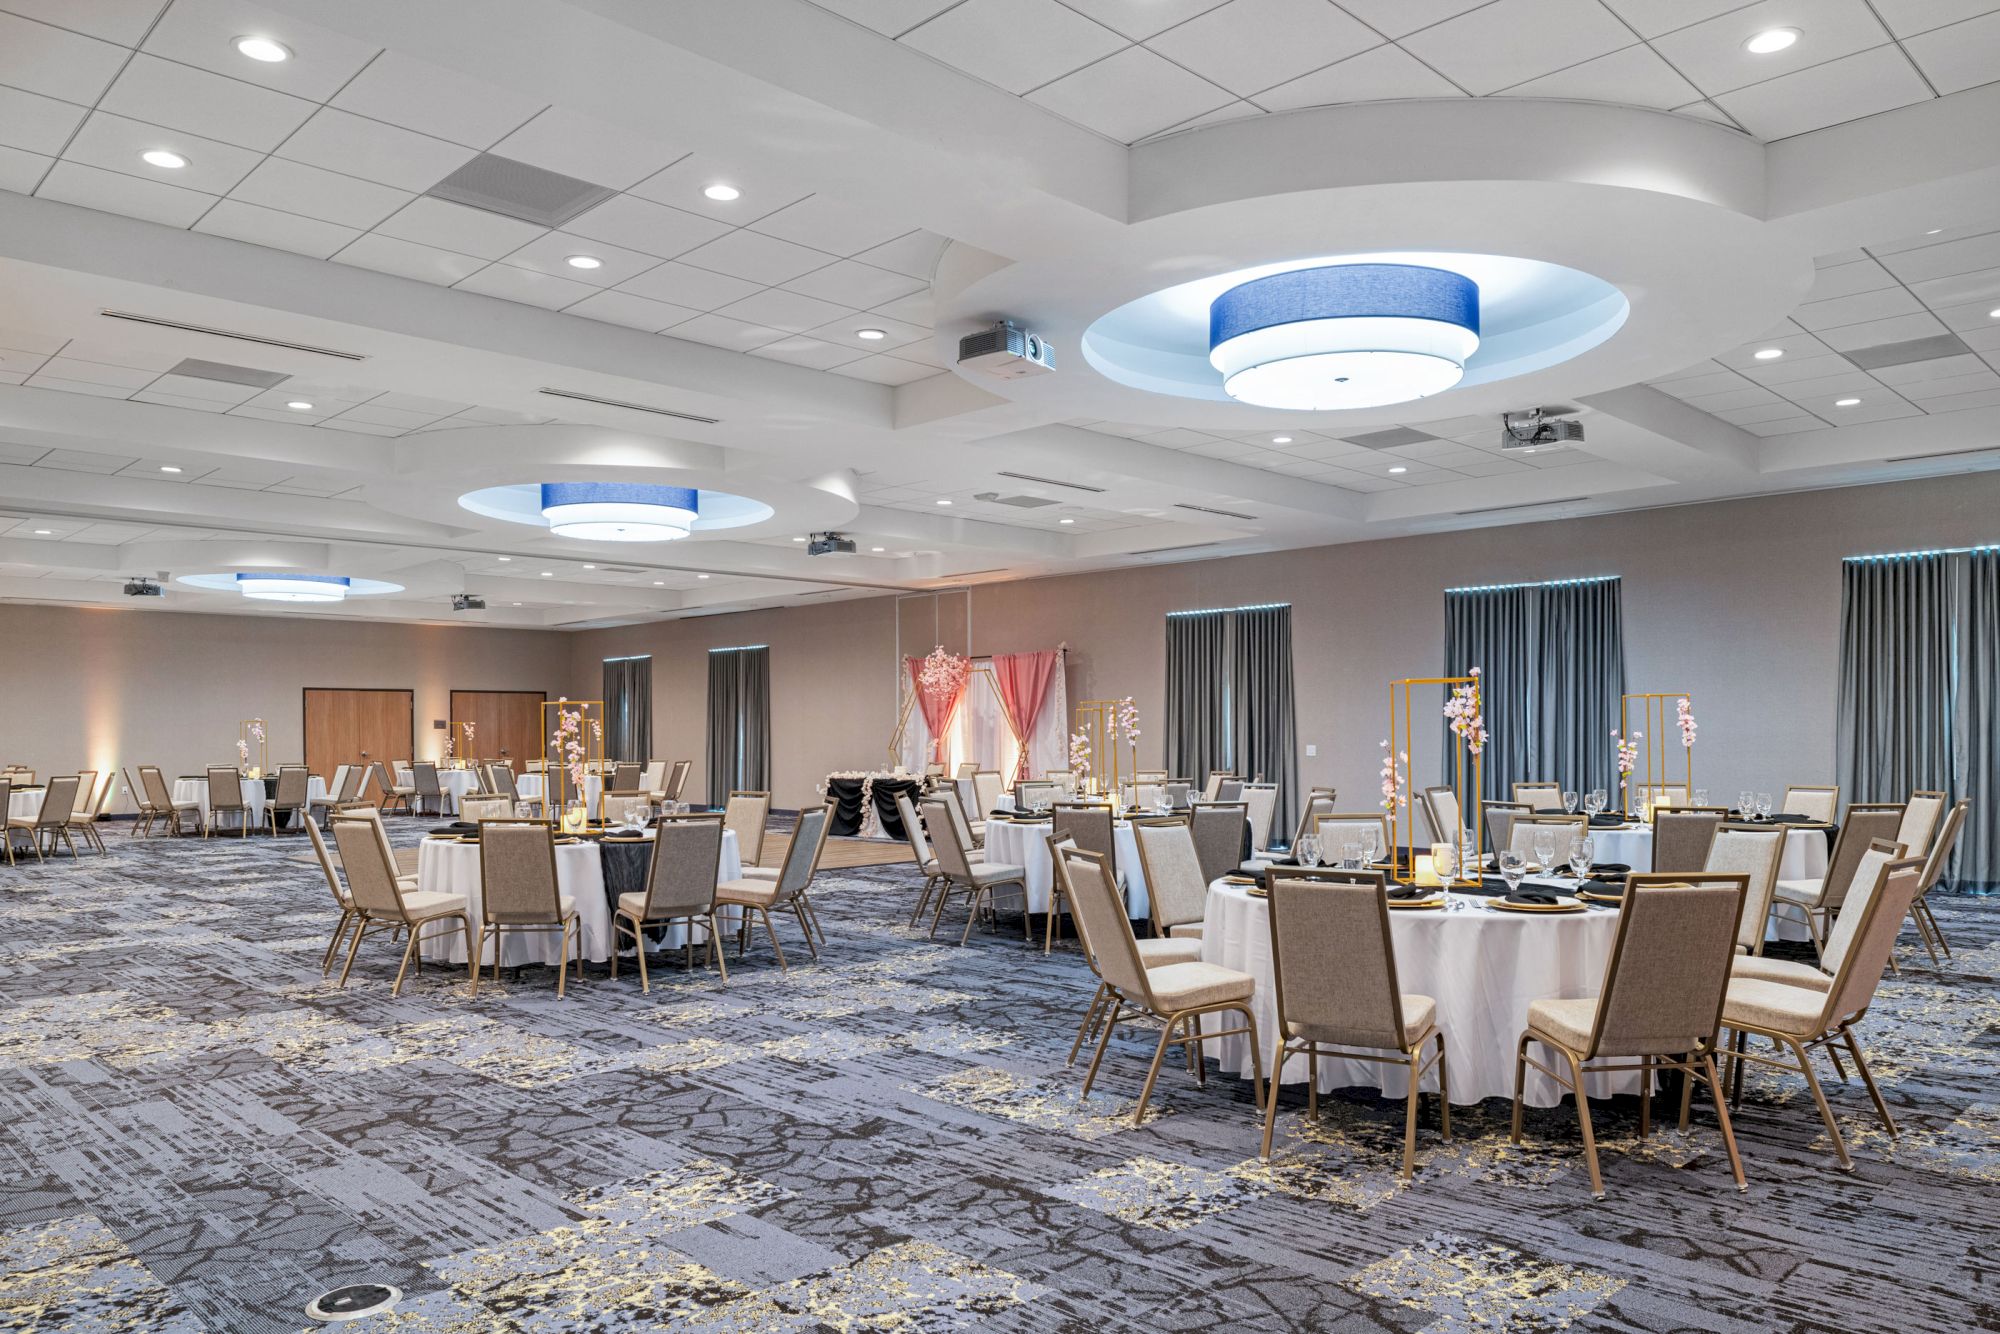 This image shows a large, elegant banquet hall set up with round tables and chairs, with subtle decorations and dimmed ceiling lights giving a serene ambiance.